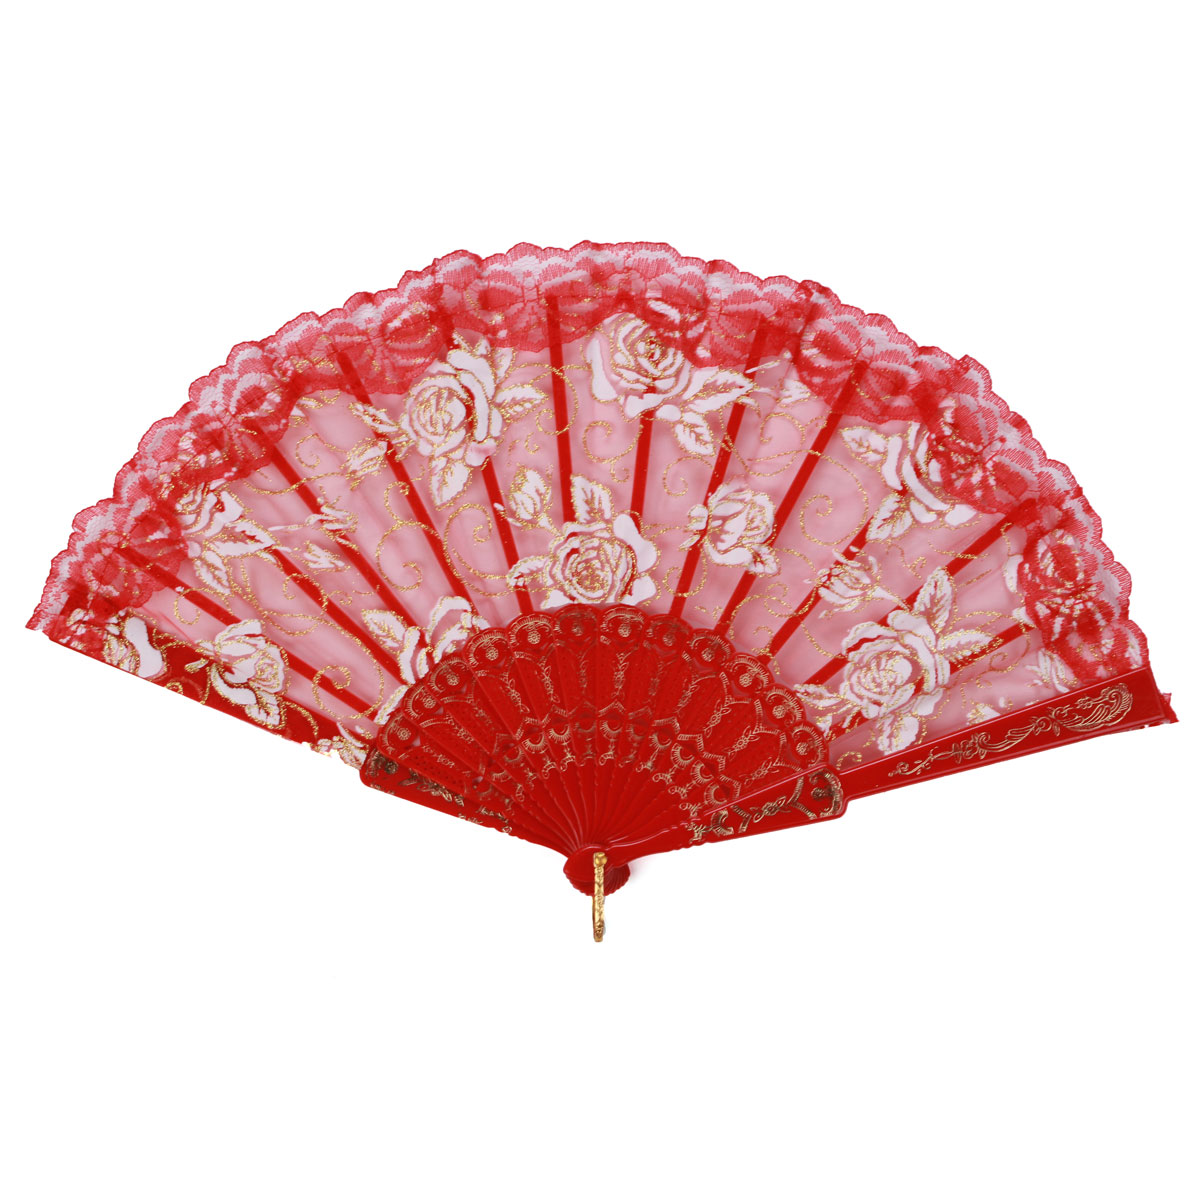 

Spanish Style Lace Silk Plastic Rose Printed Folding Hand Fans Dance Party Wedding Favor Decoration